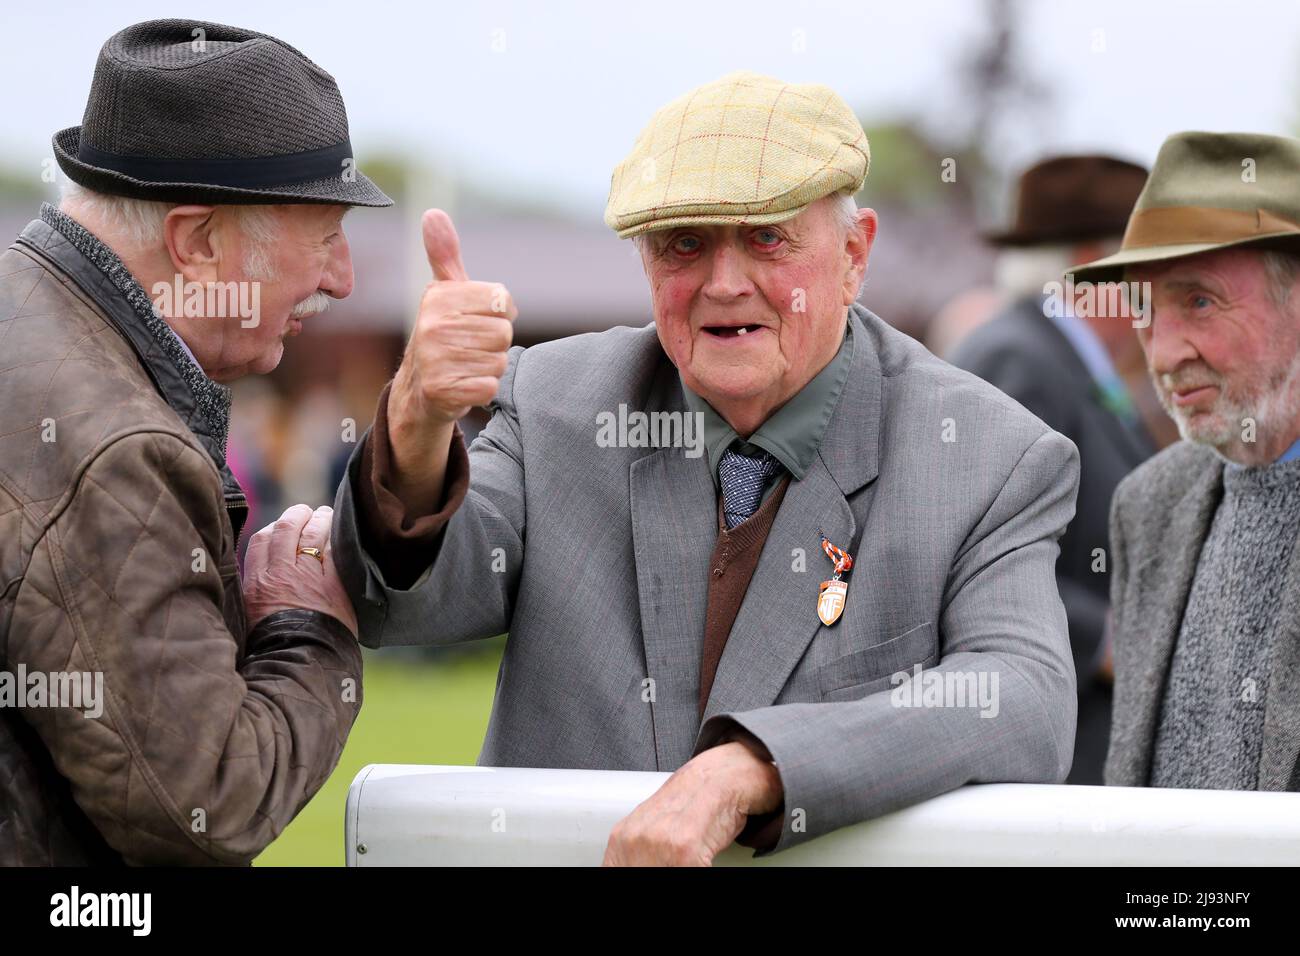 MICK EASTERBY, RACE HORSE TRAINER, 2022 Stock Photo